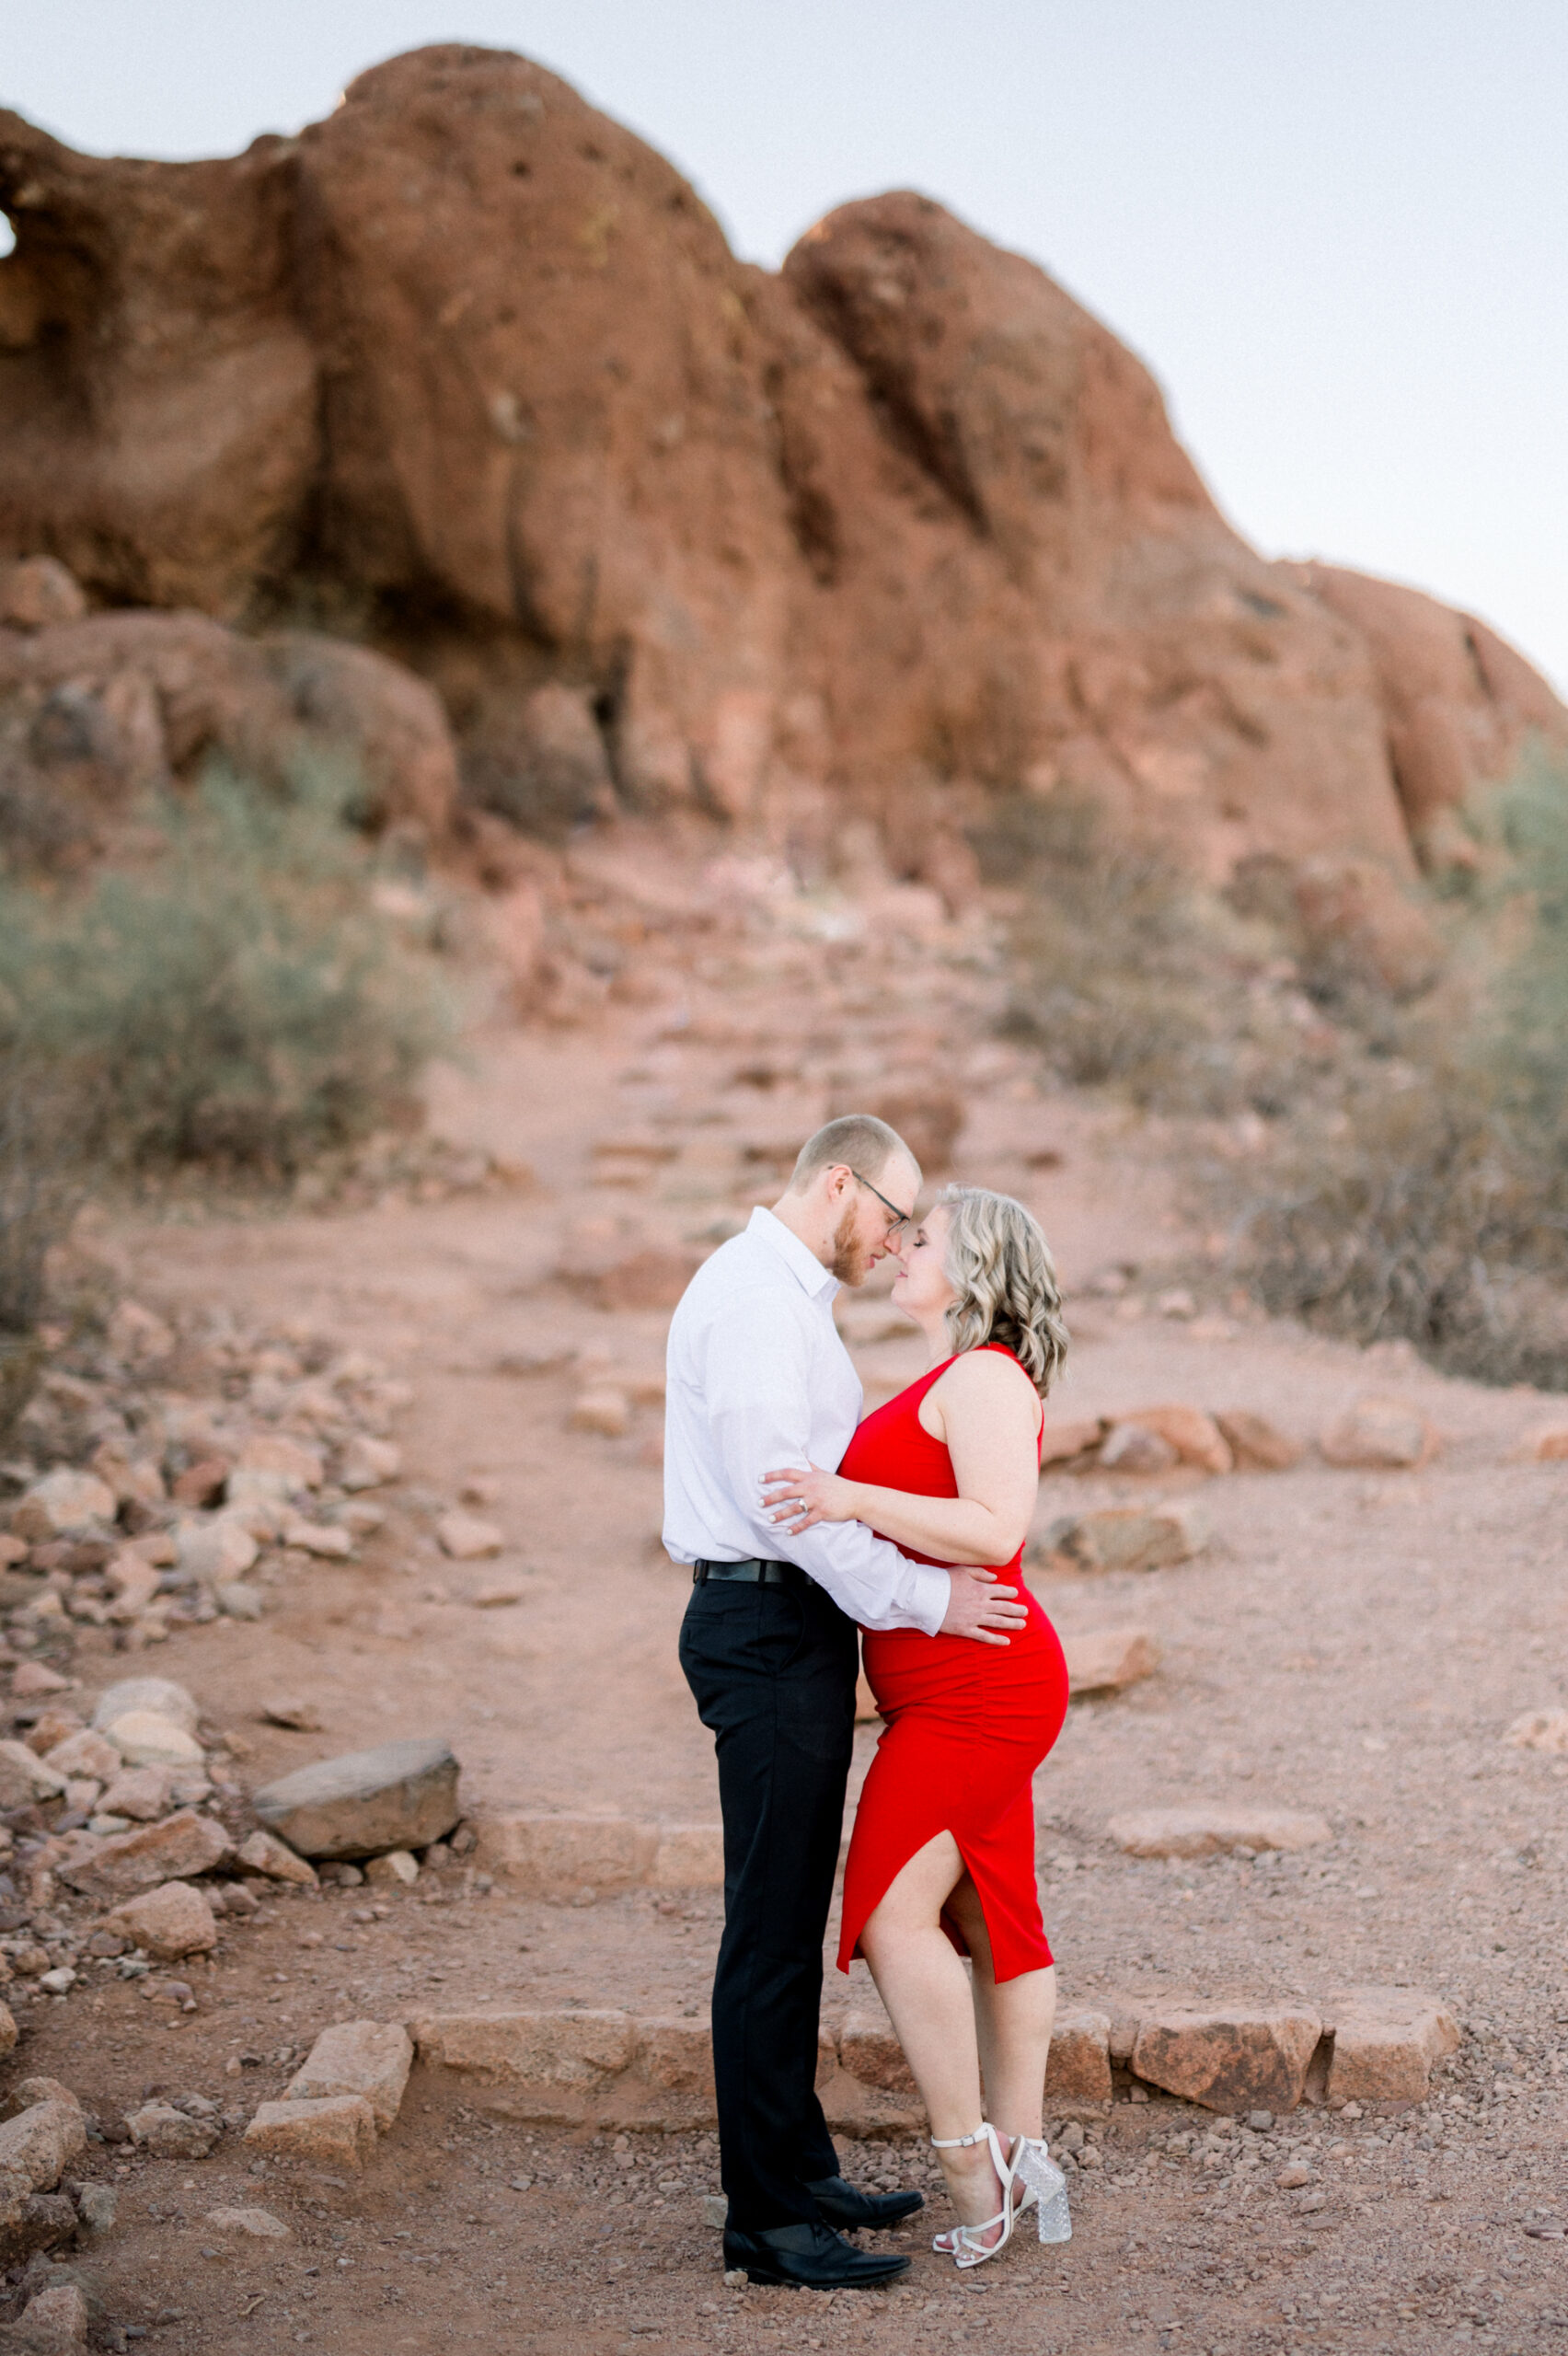 Haley and Garretts Papago Park Engagement Session was a beautiful one. They traveled all the way from Wyomig for their desert engagement session!